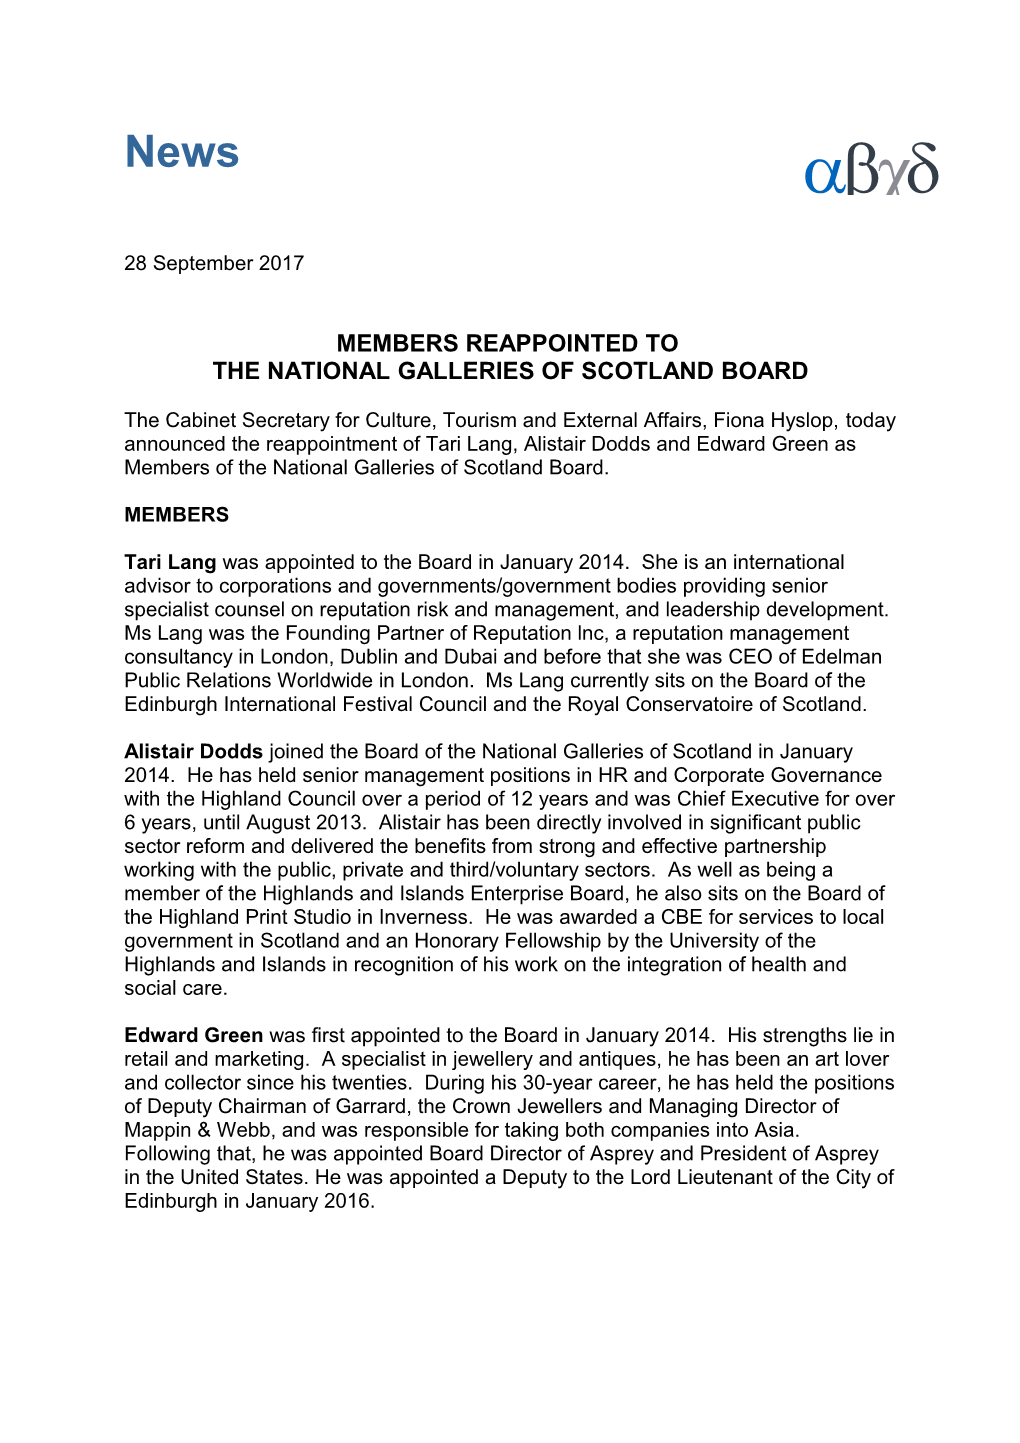 The National Galleries of Scotland Board